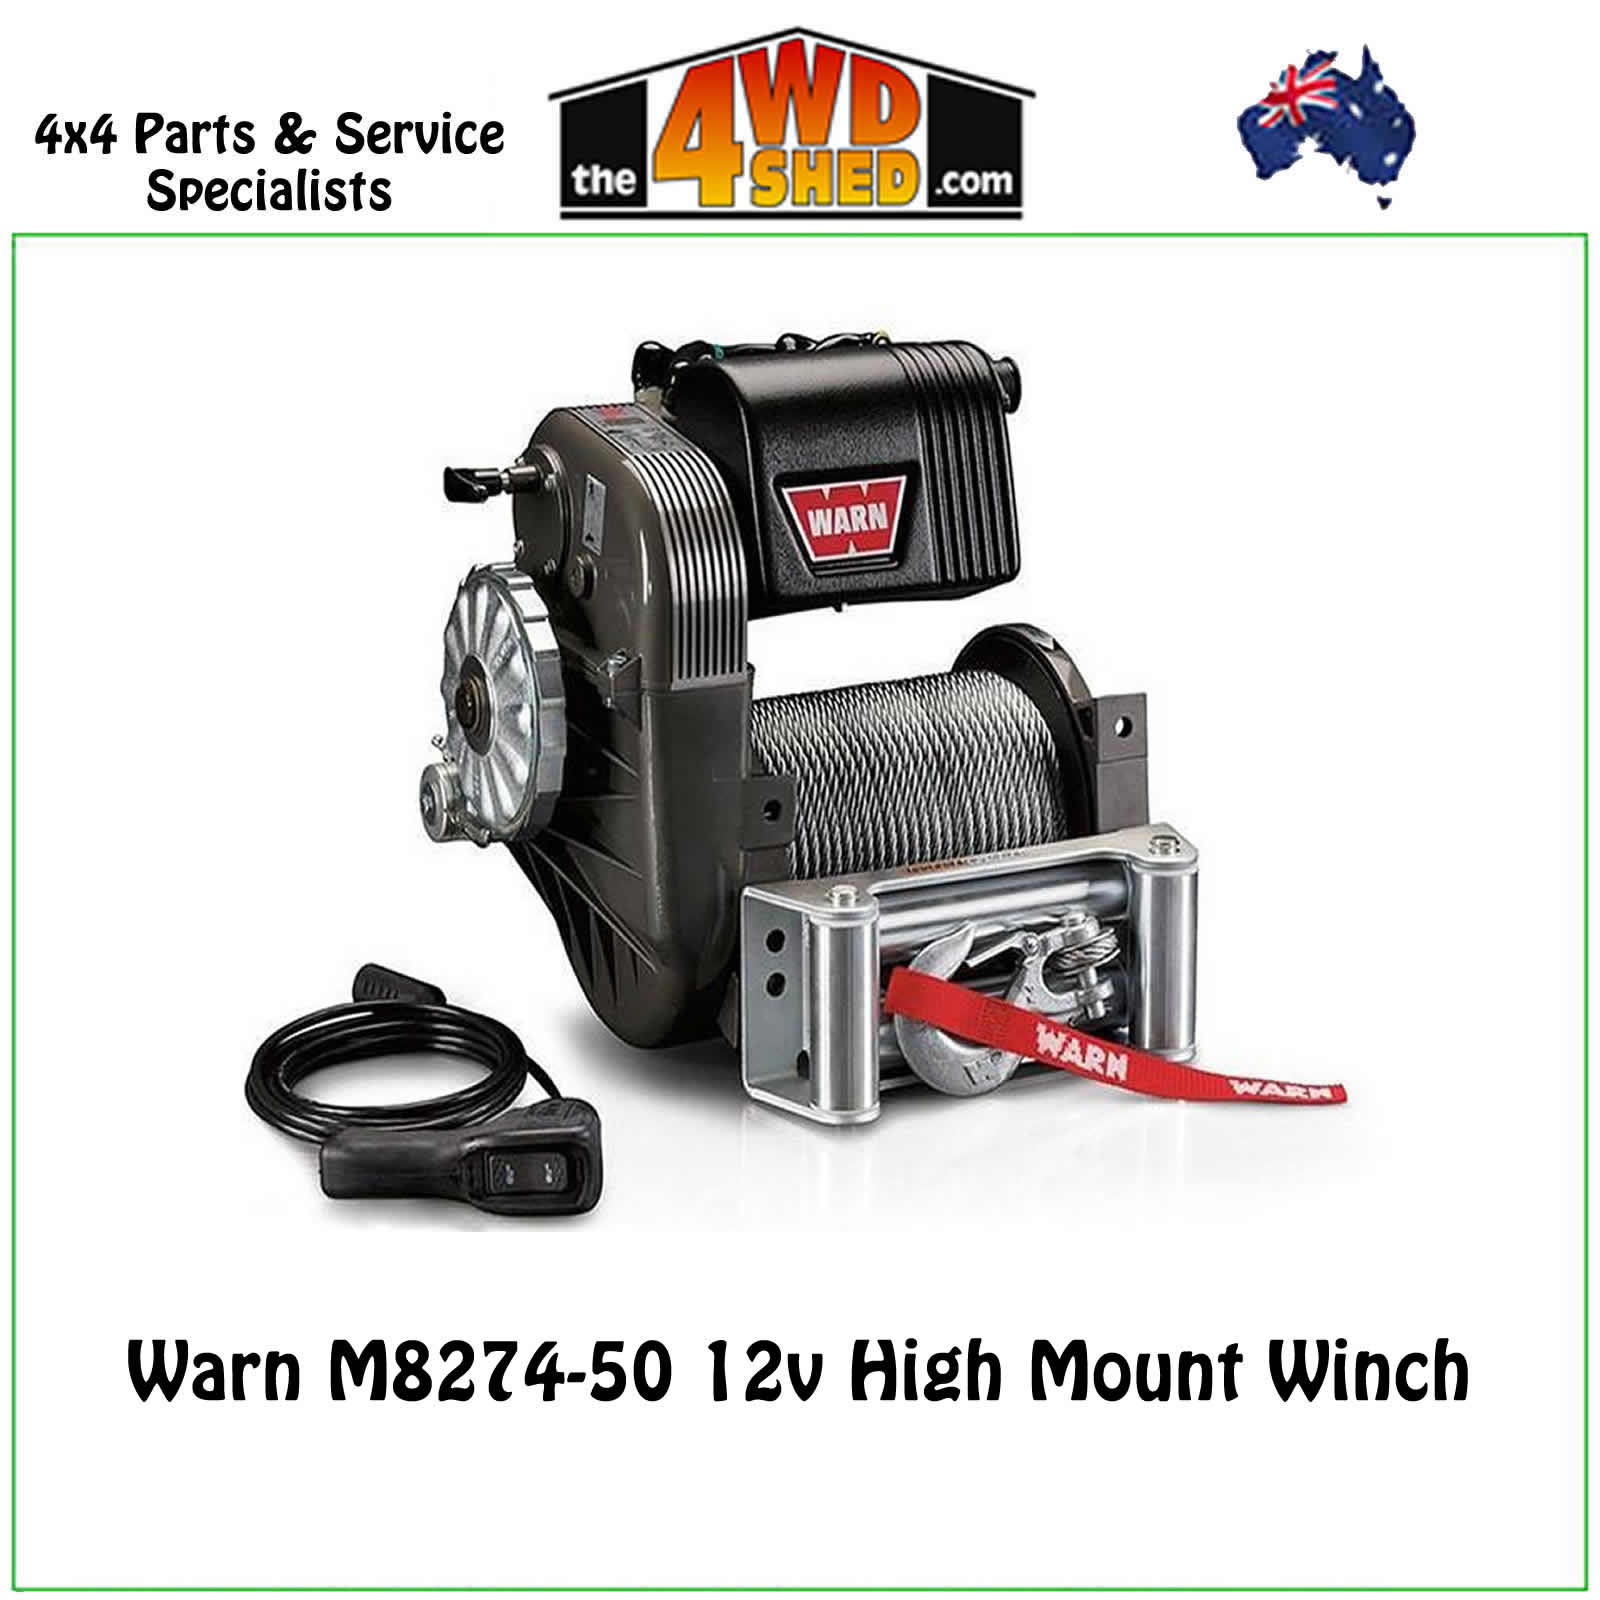 <span style="font-size: 19px;">Warn M8274-50 12v High Mount Winch</span>